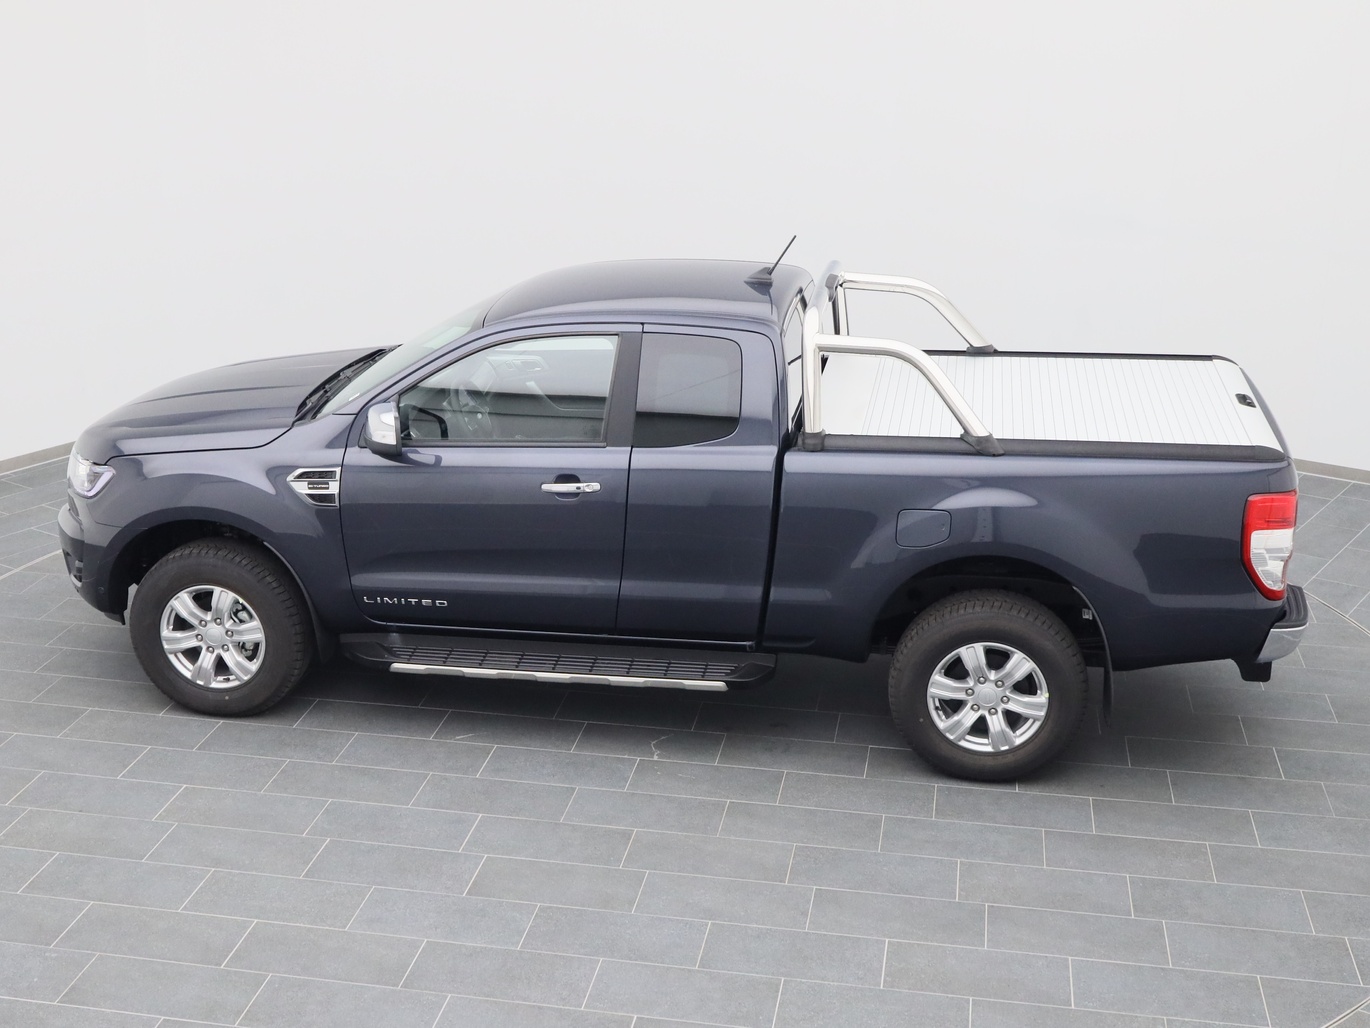  Ford Ranger Extrakab. Limited 213PS Aut. / Rollo in Royal Grau 